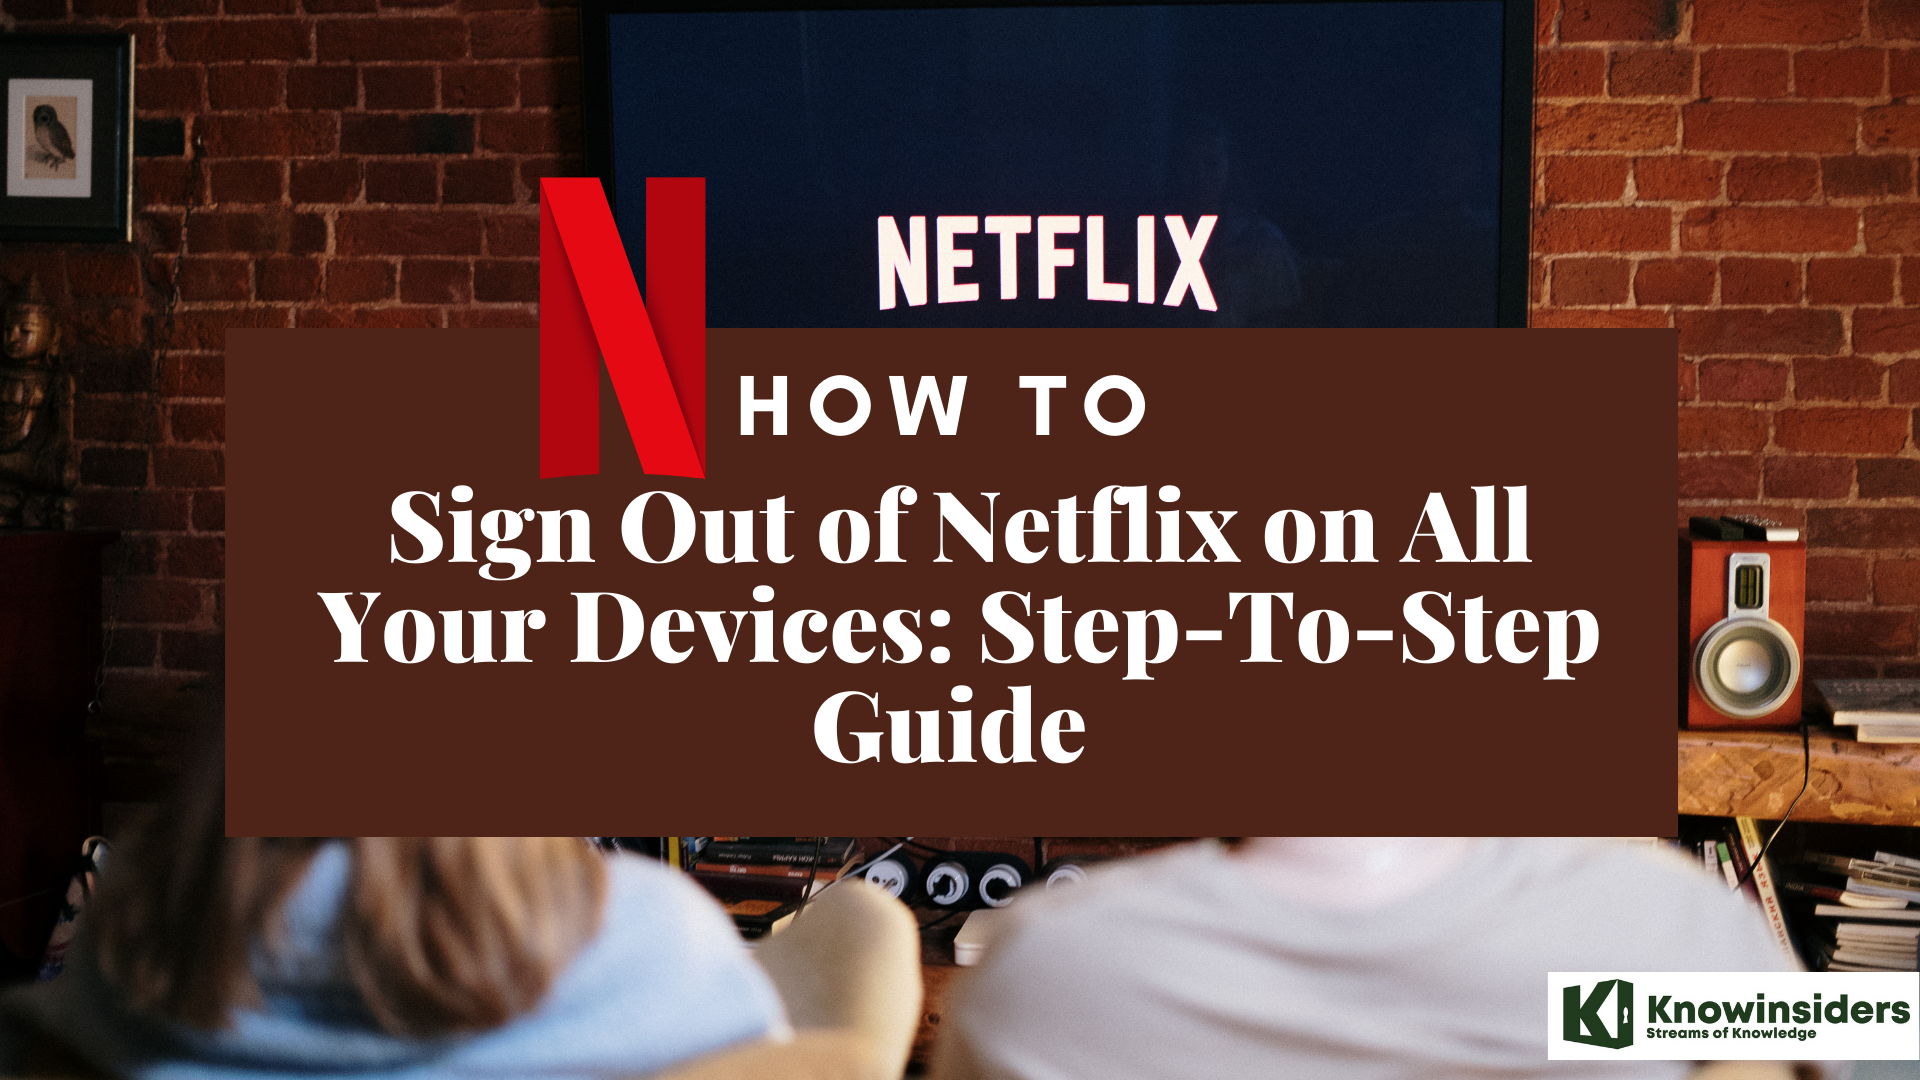 Simple Ways to Log Out of Netflix on All Devices